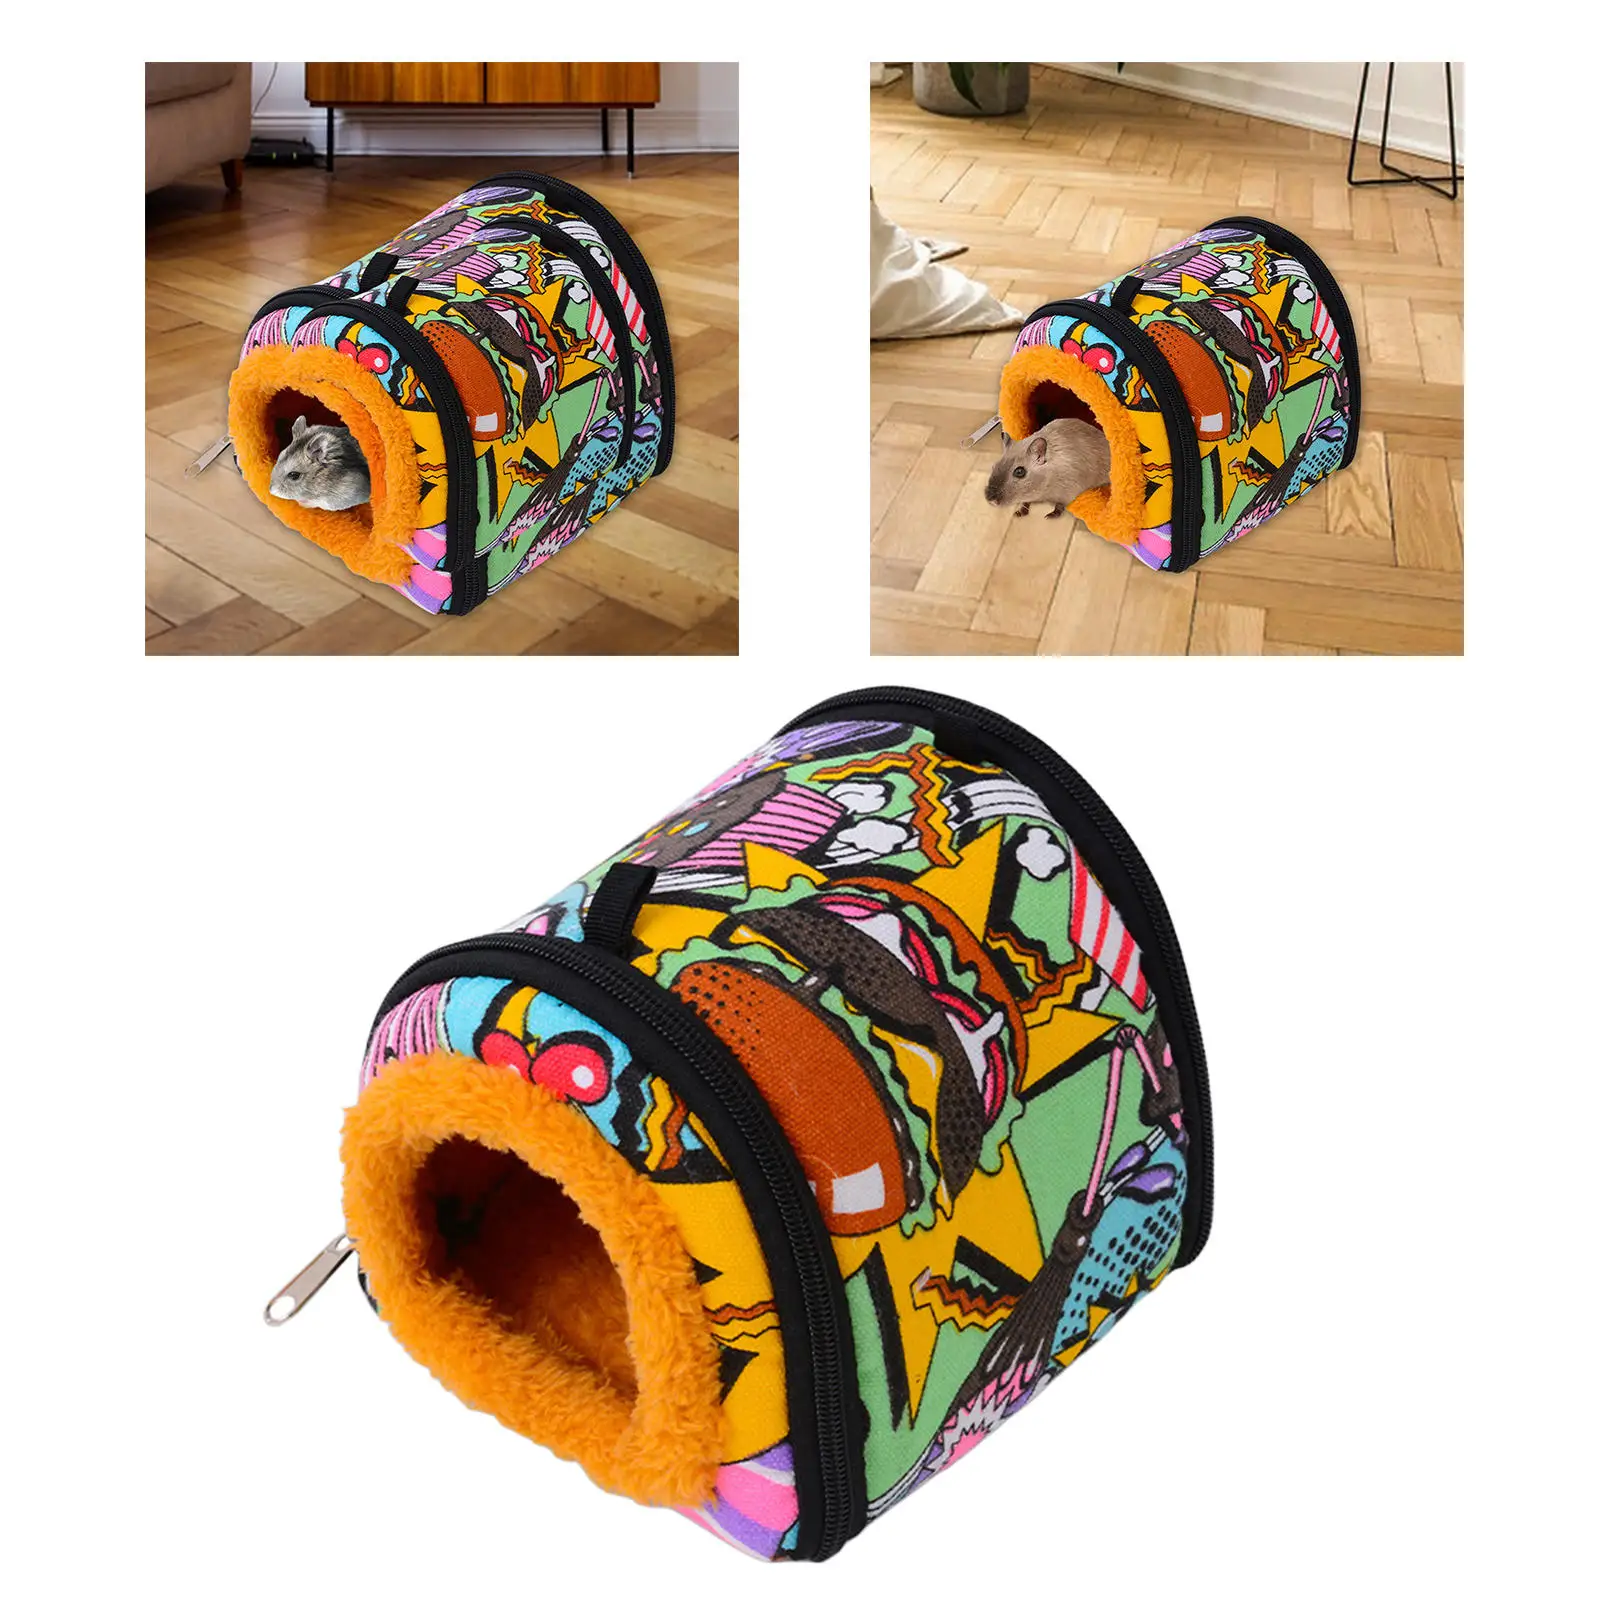 Hamster Hammock Guinea Pig Bed Chinchillas Small Pets Nest Rat Nest for Squirrel Hedgehog Guinea Pig Bed House Cage Nest Hamster